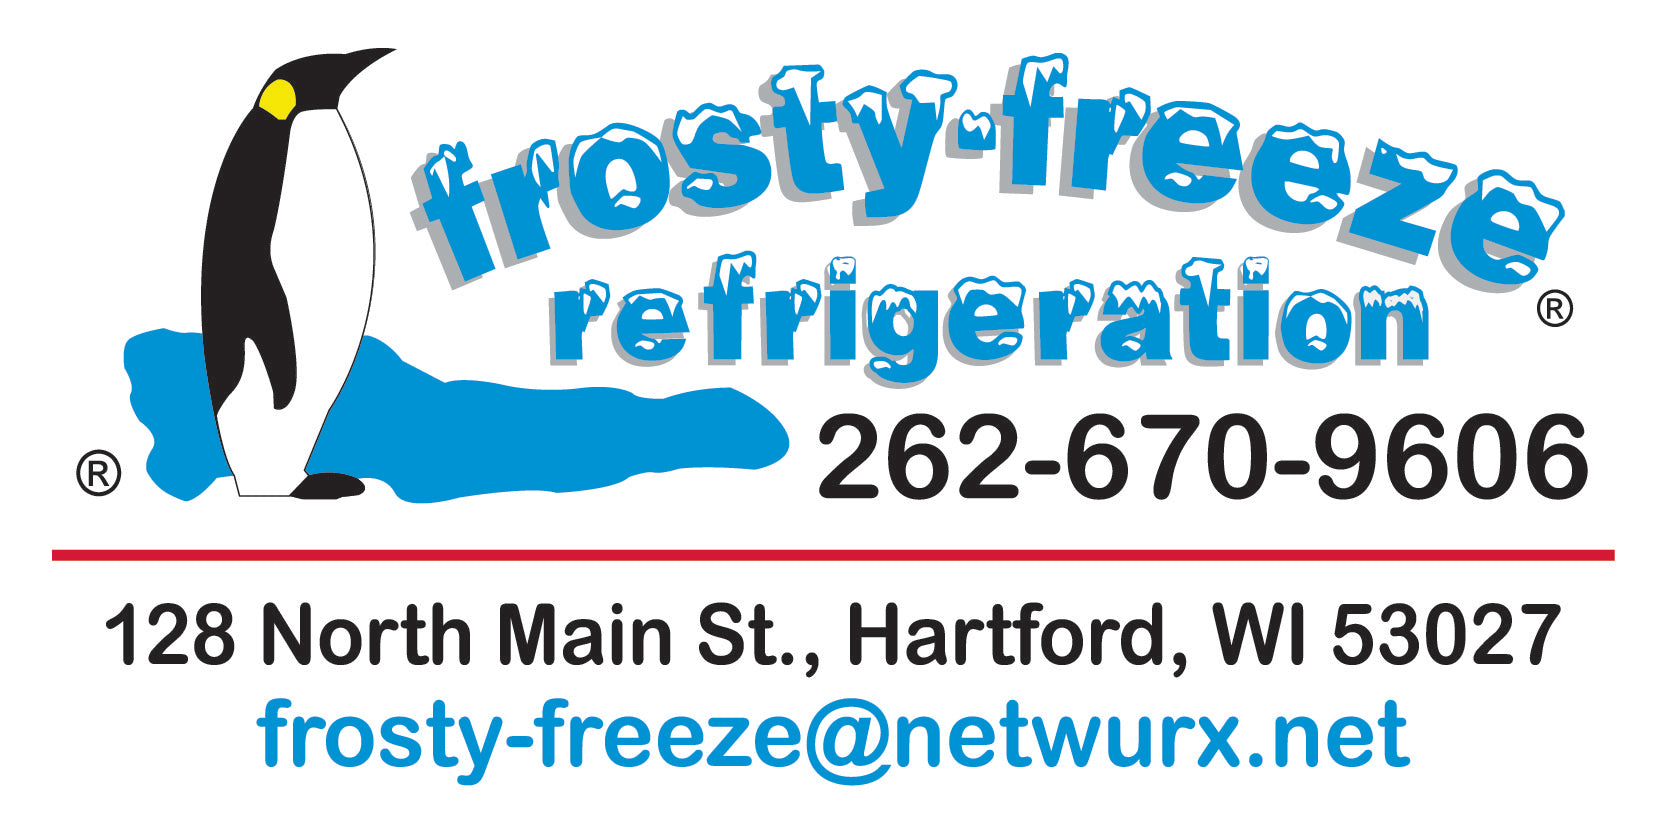 R600A, MODERN Refrigerant, Convenient 6 oz. Cans, Isobutane, R-600 Gas –  Frosty Freeze A/C Products Company